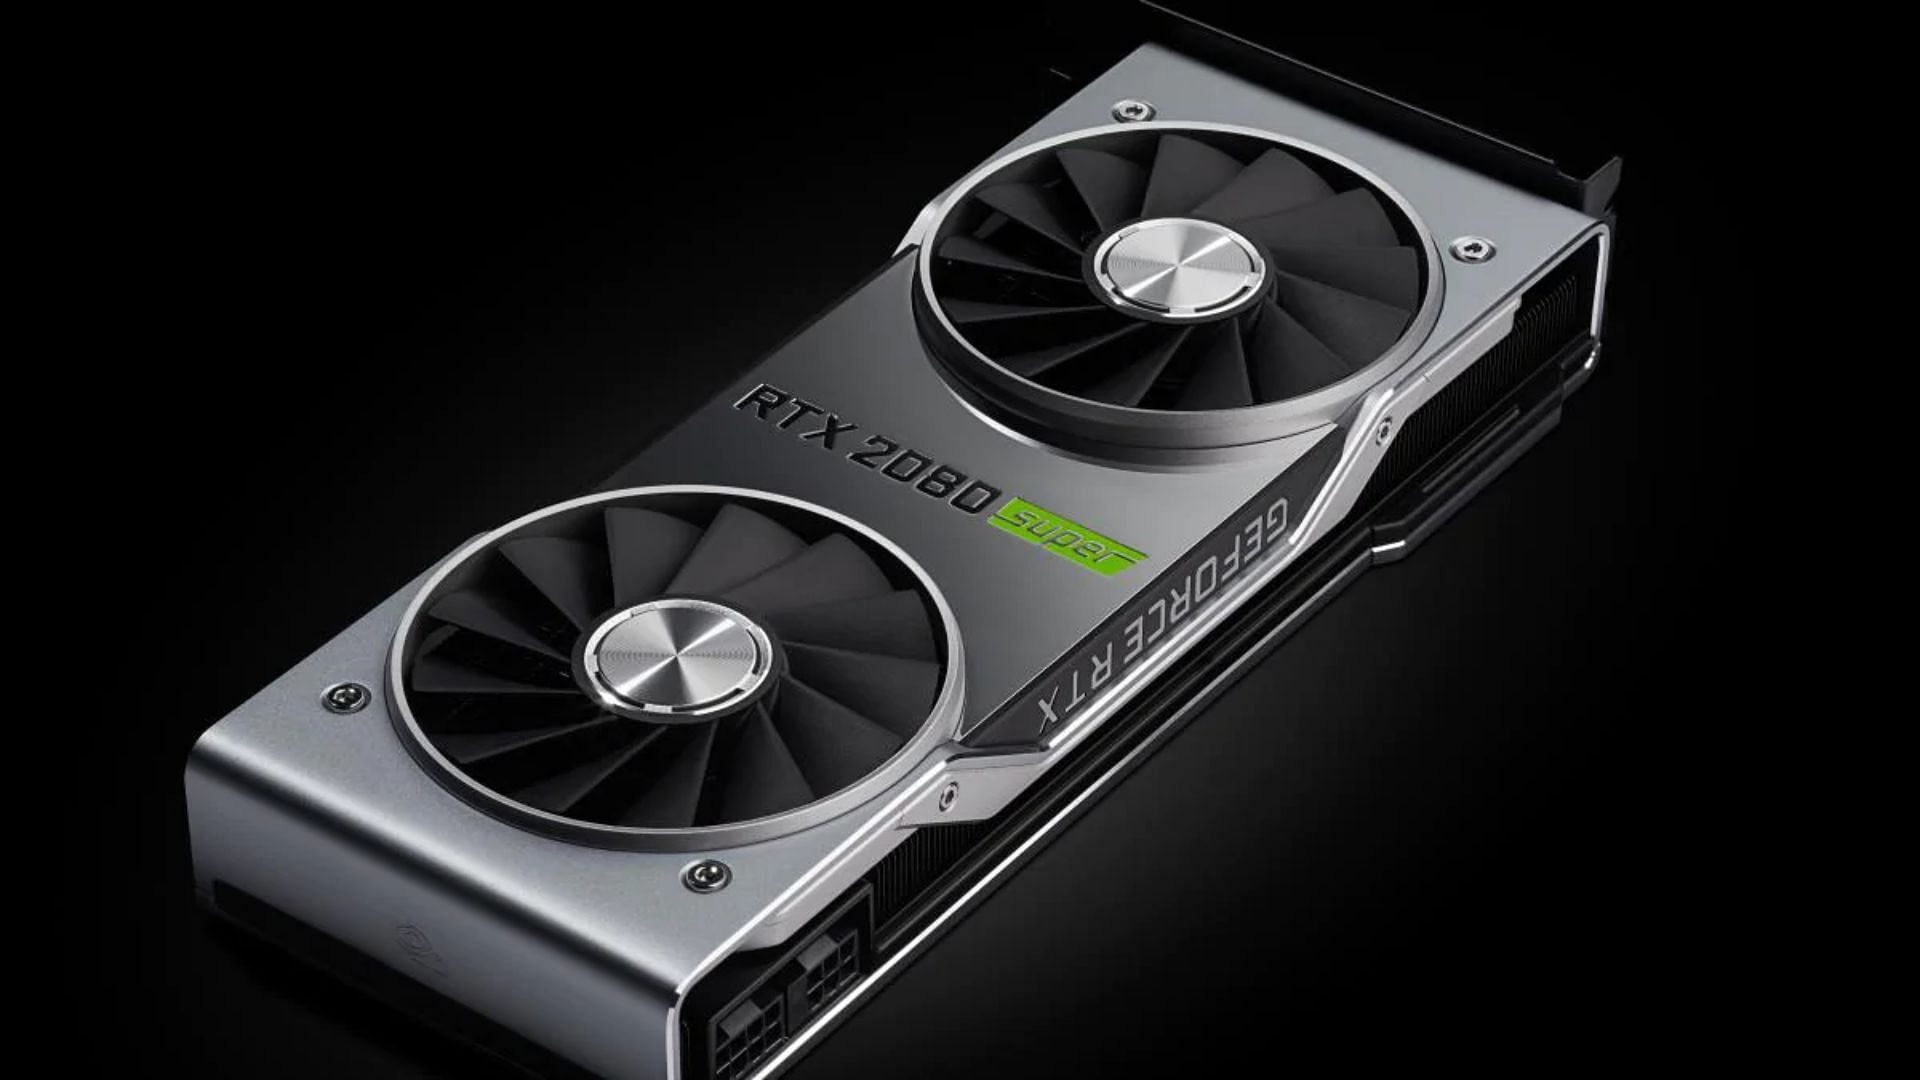 The RTX 2080 Super Founder